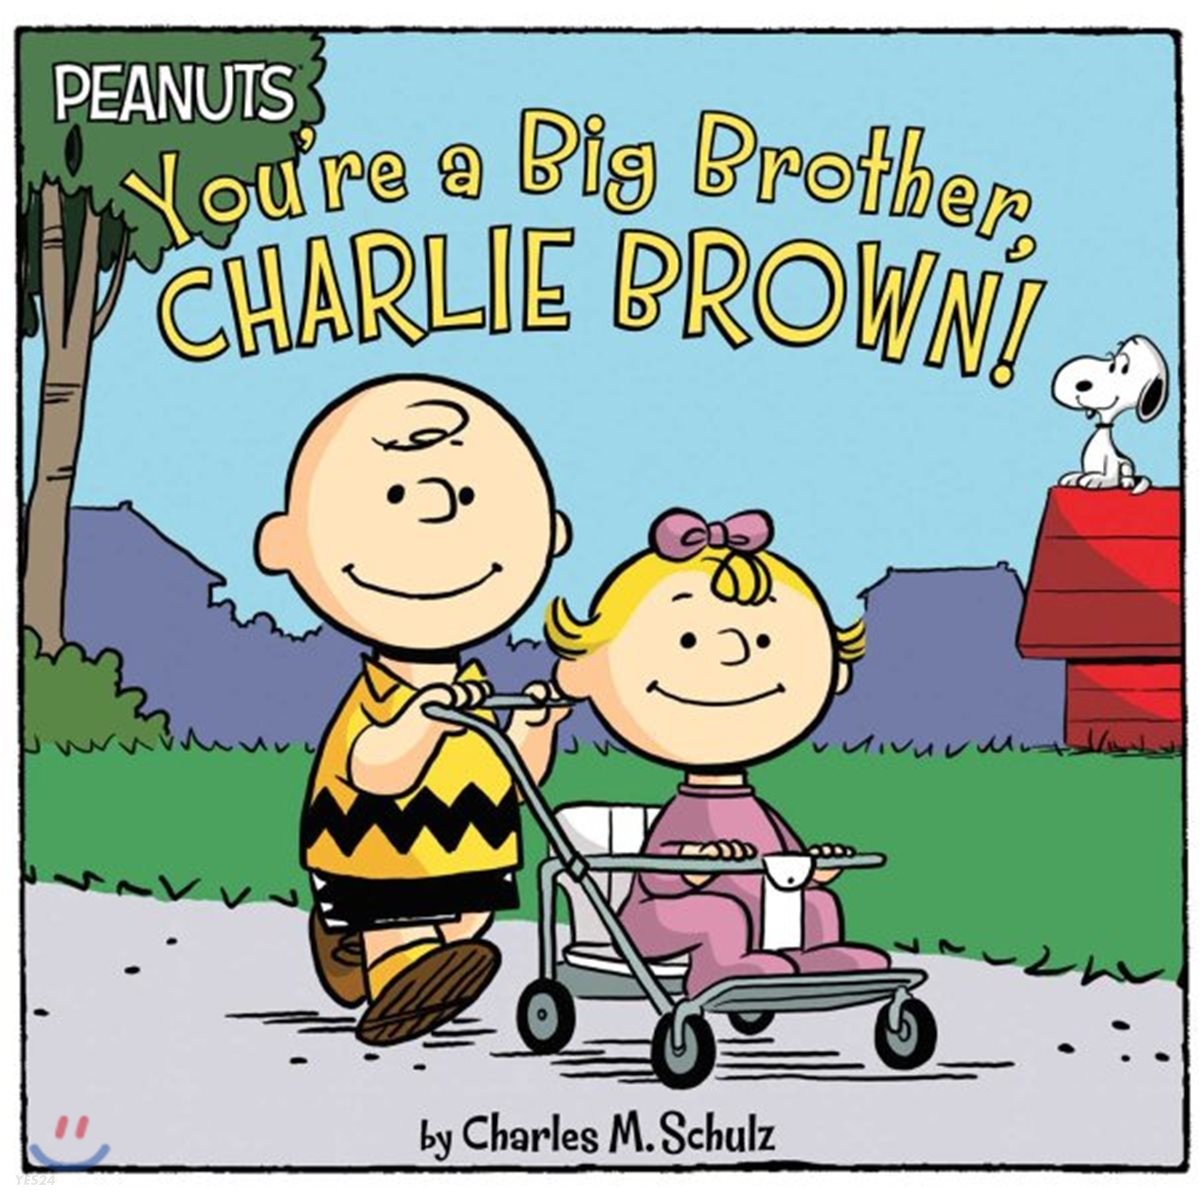 Youre a Big Brother Charlie Brown!